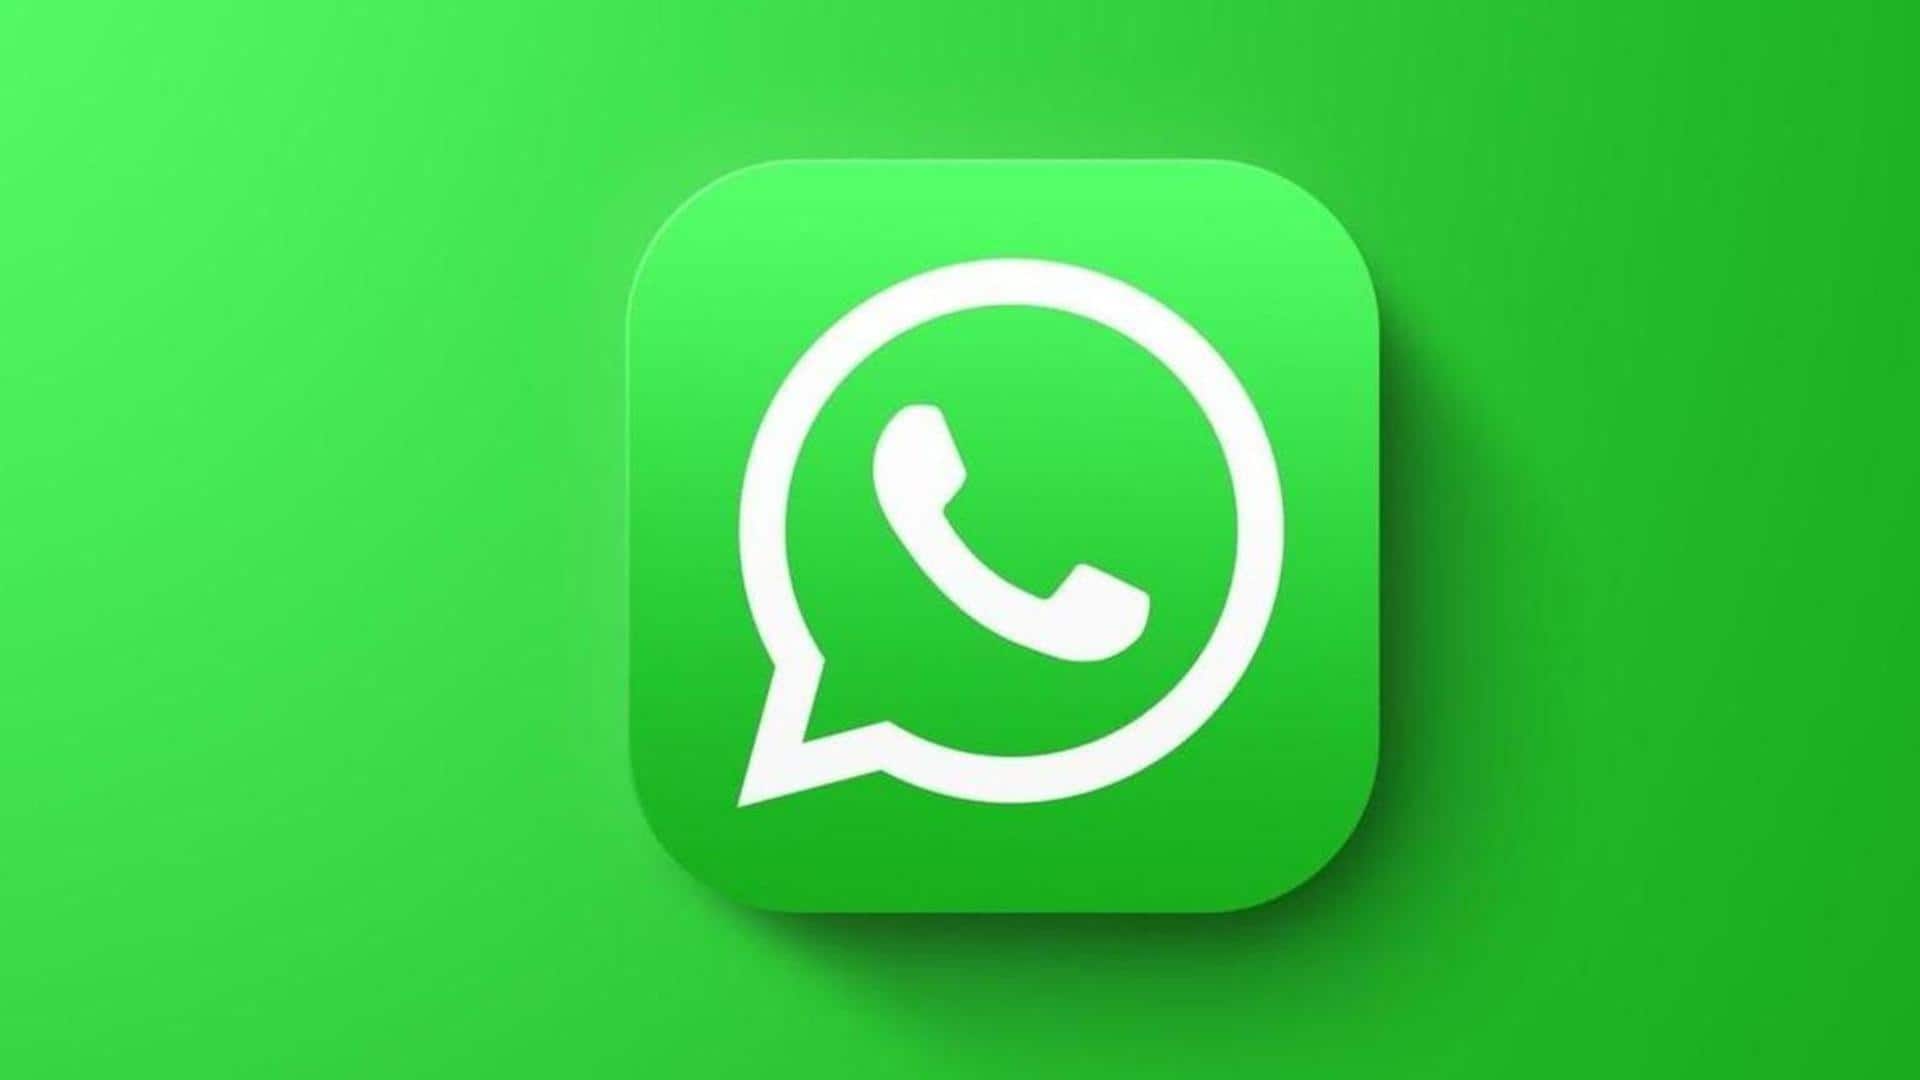 WhatsApp outage: Some users face issues while downloading videos